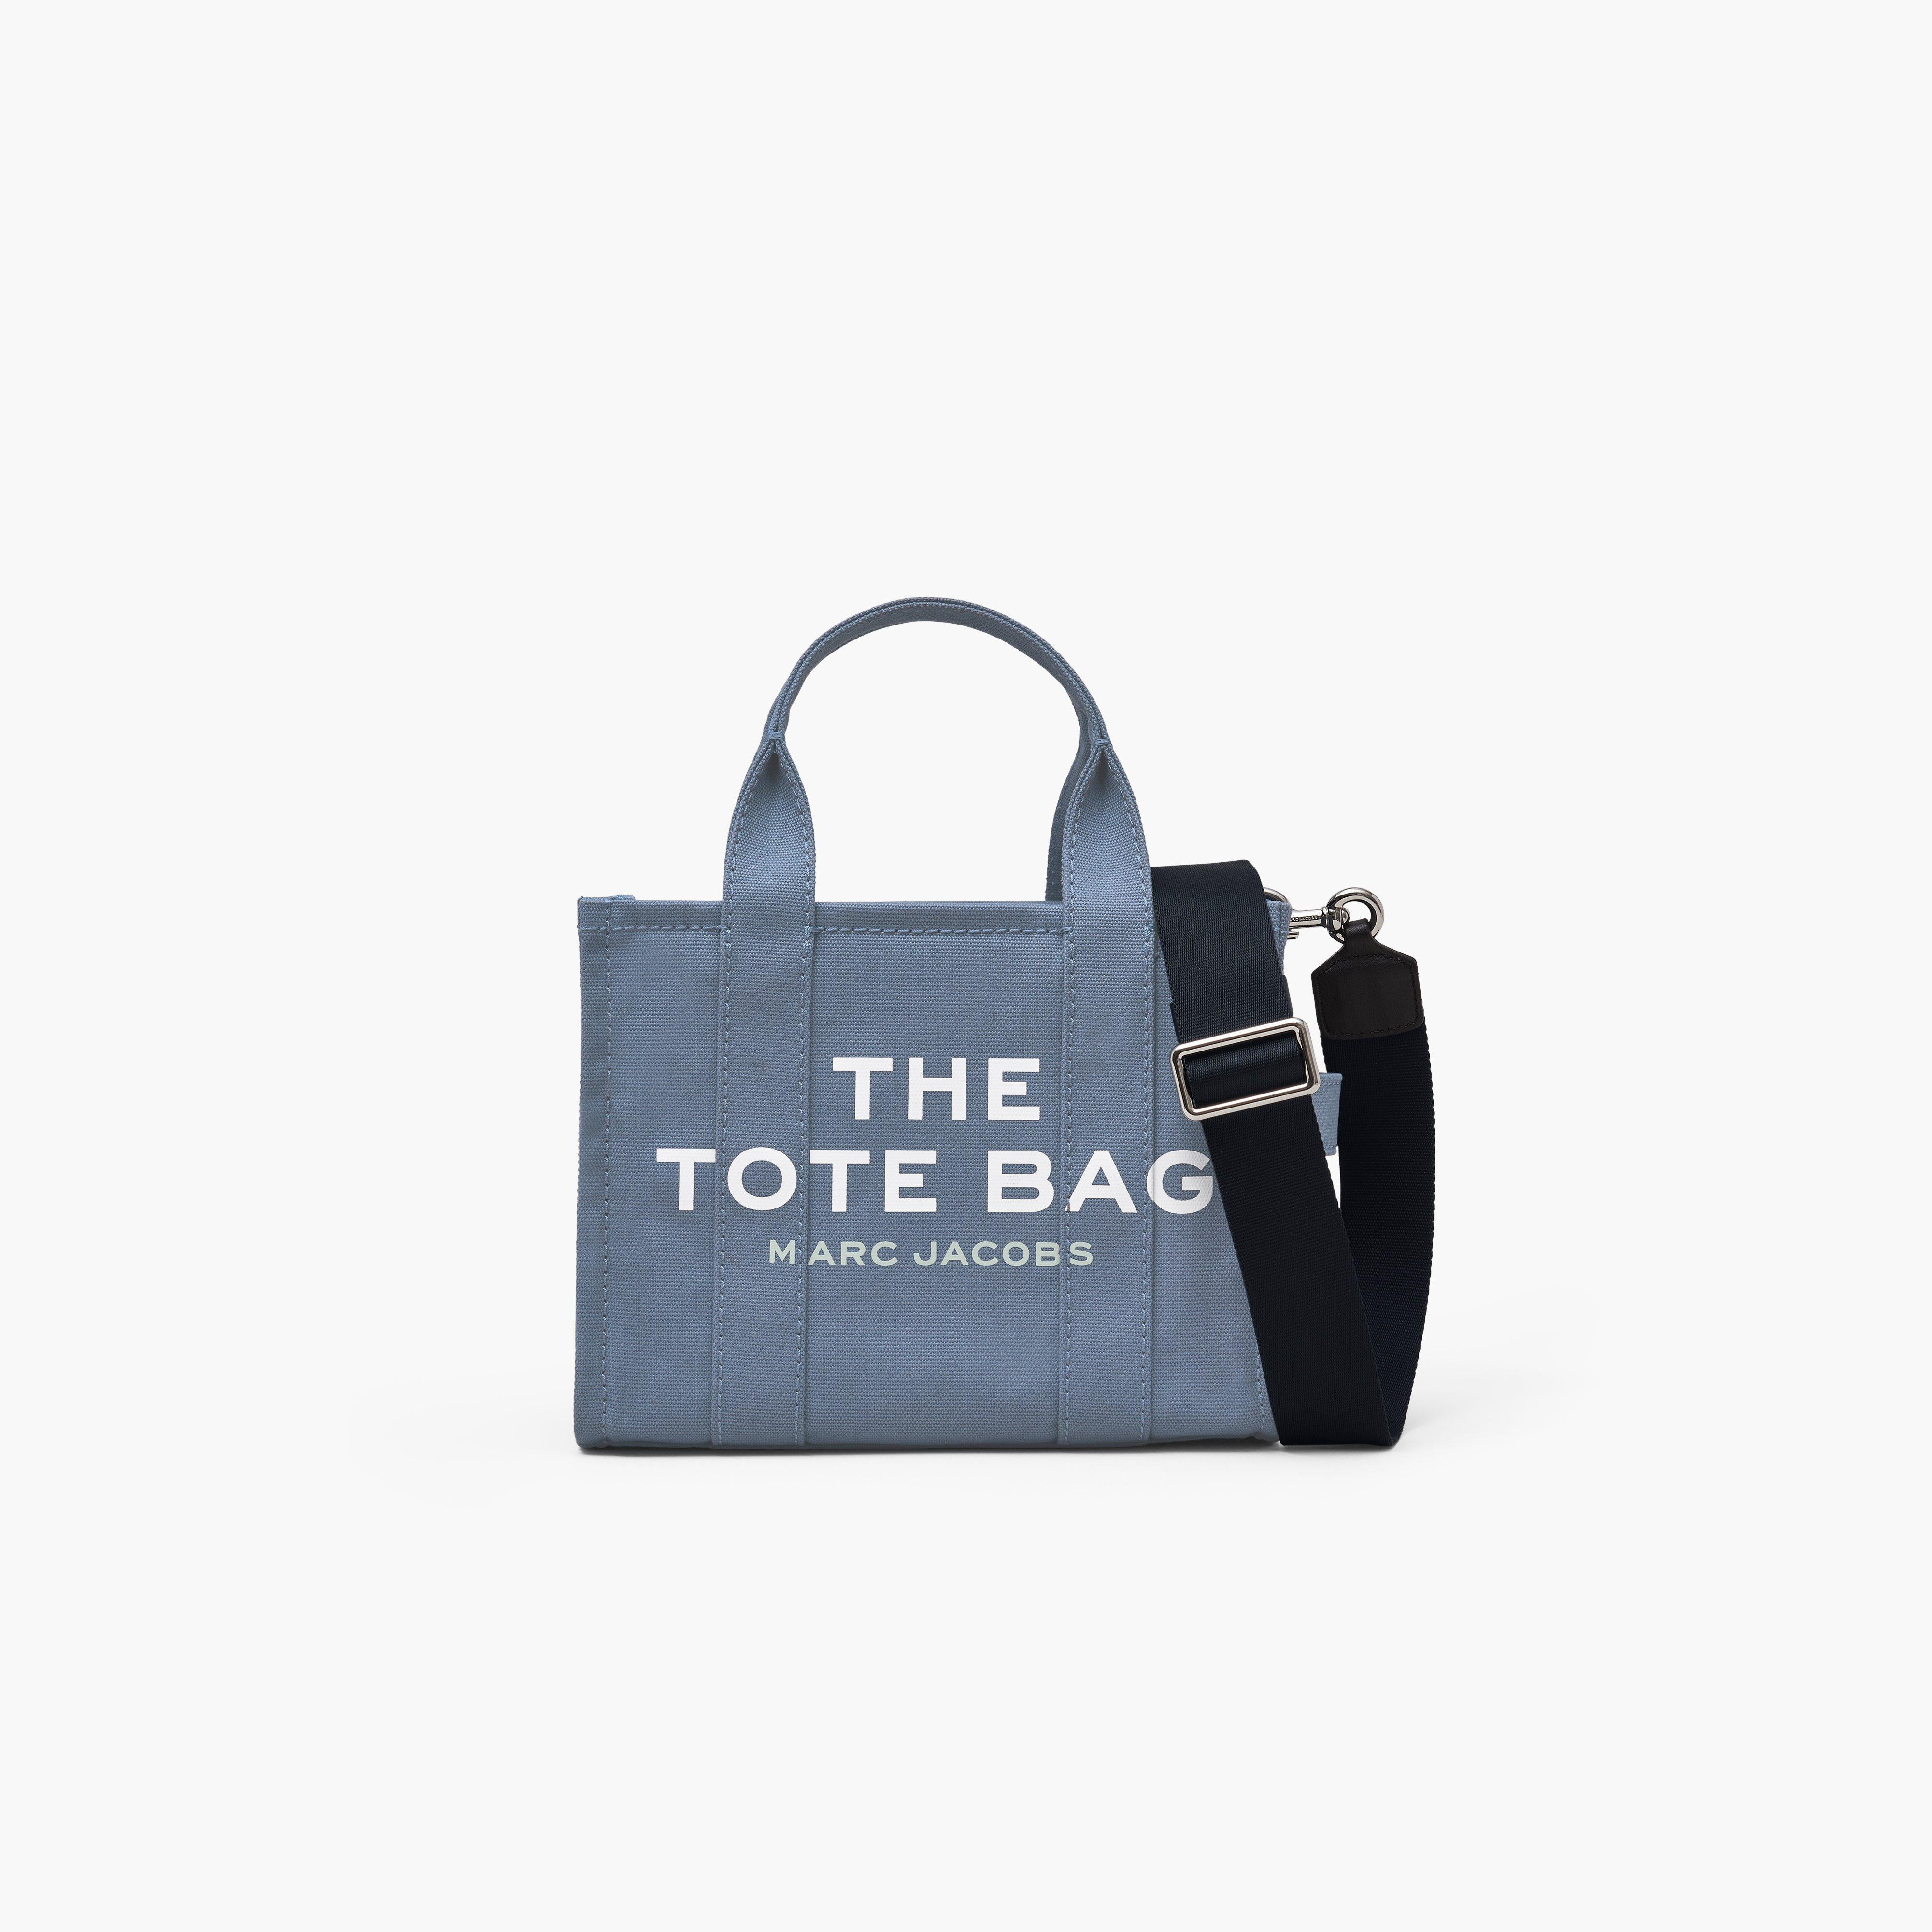 The Small Tote Bag in Blue Shadow